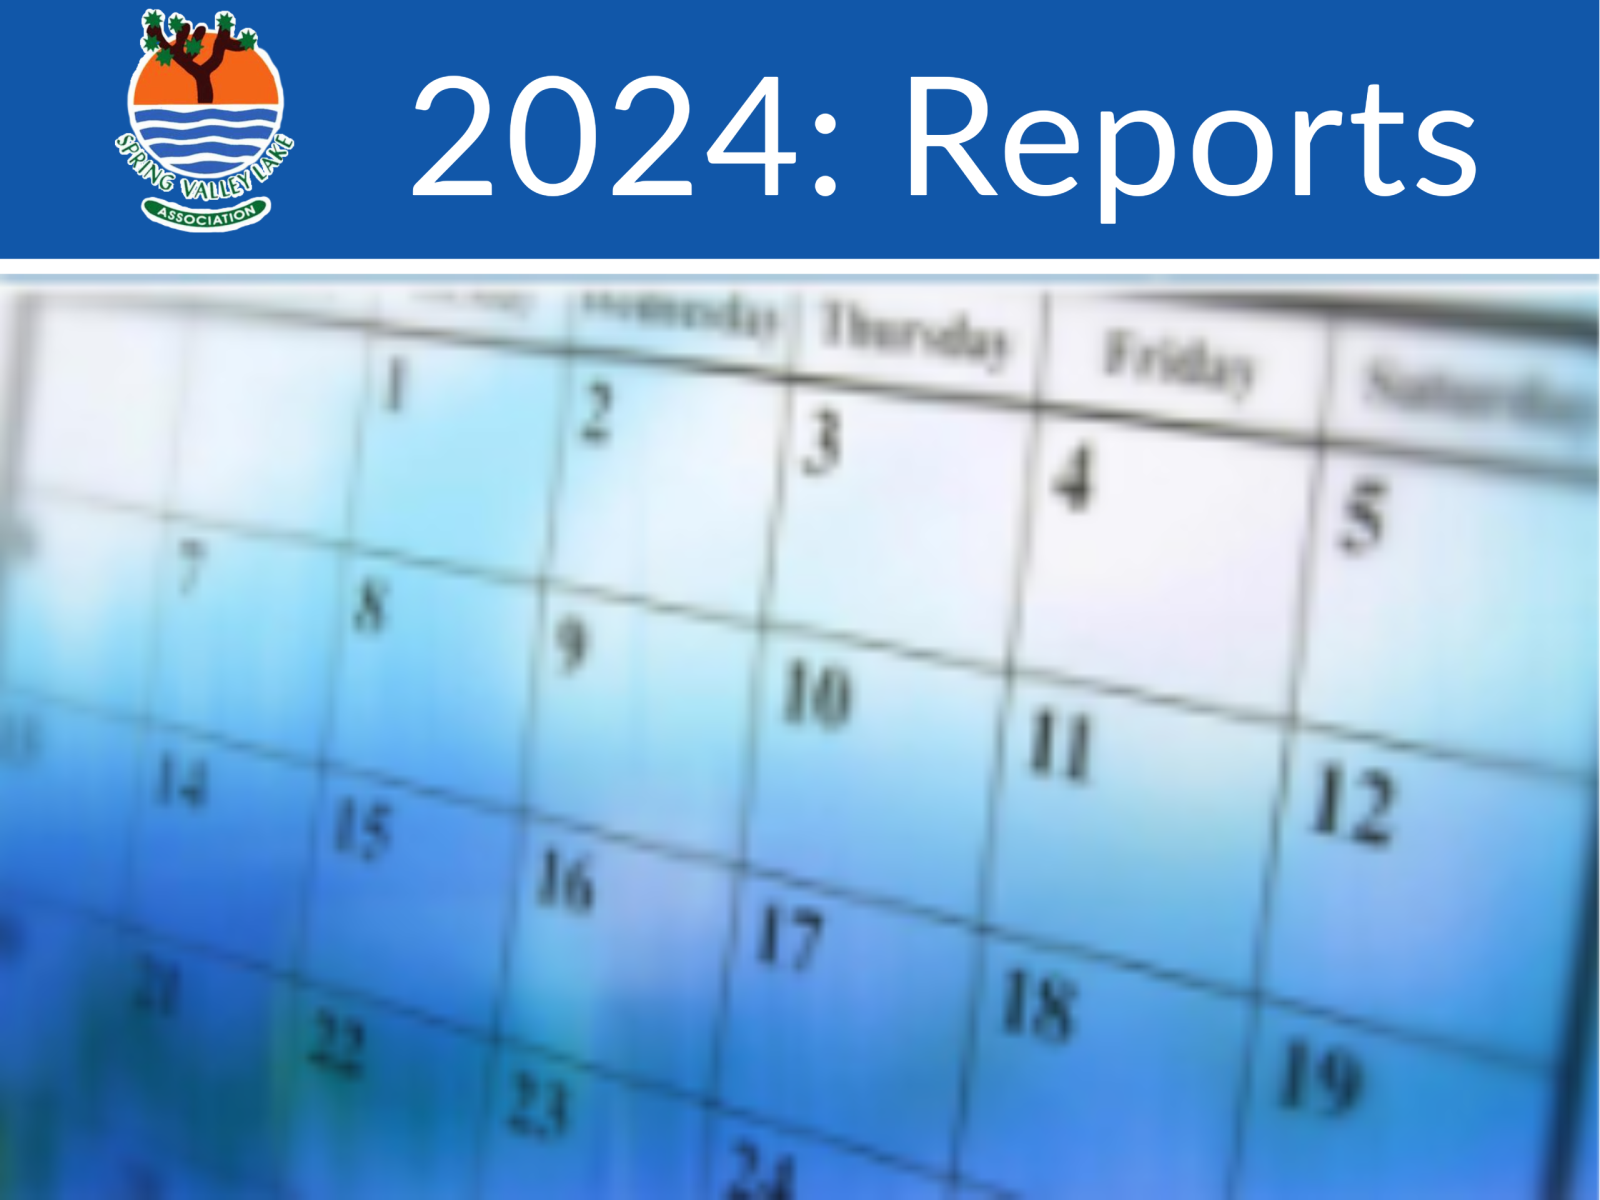 2024: Reports